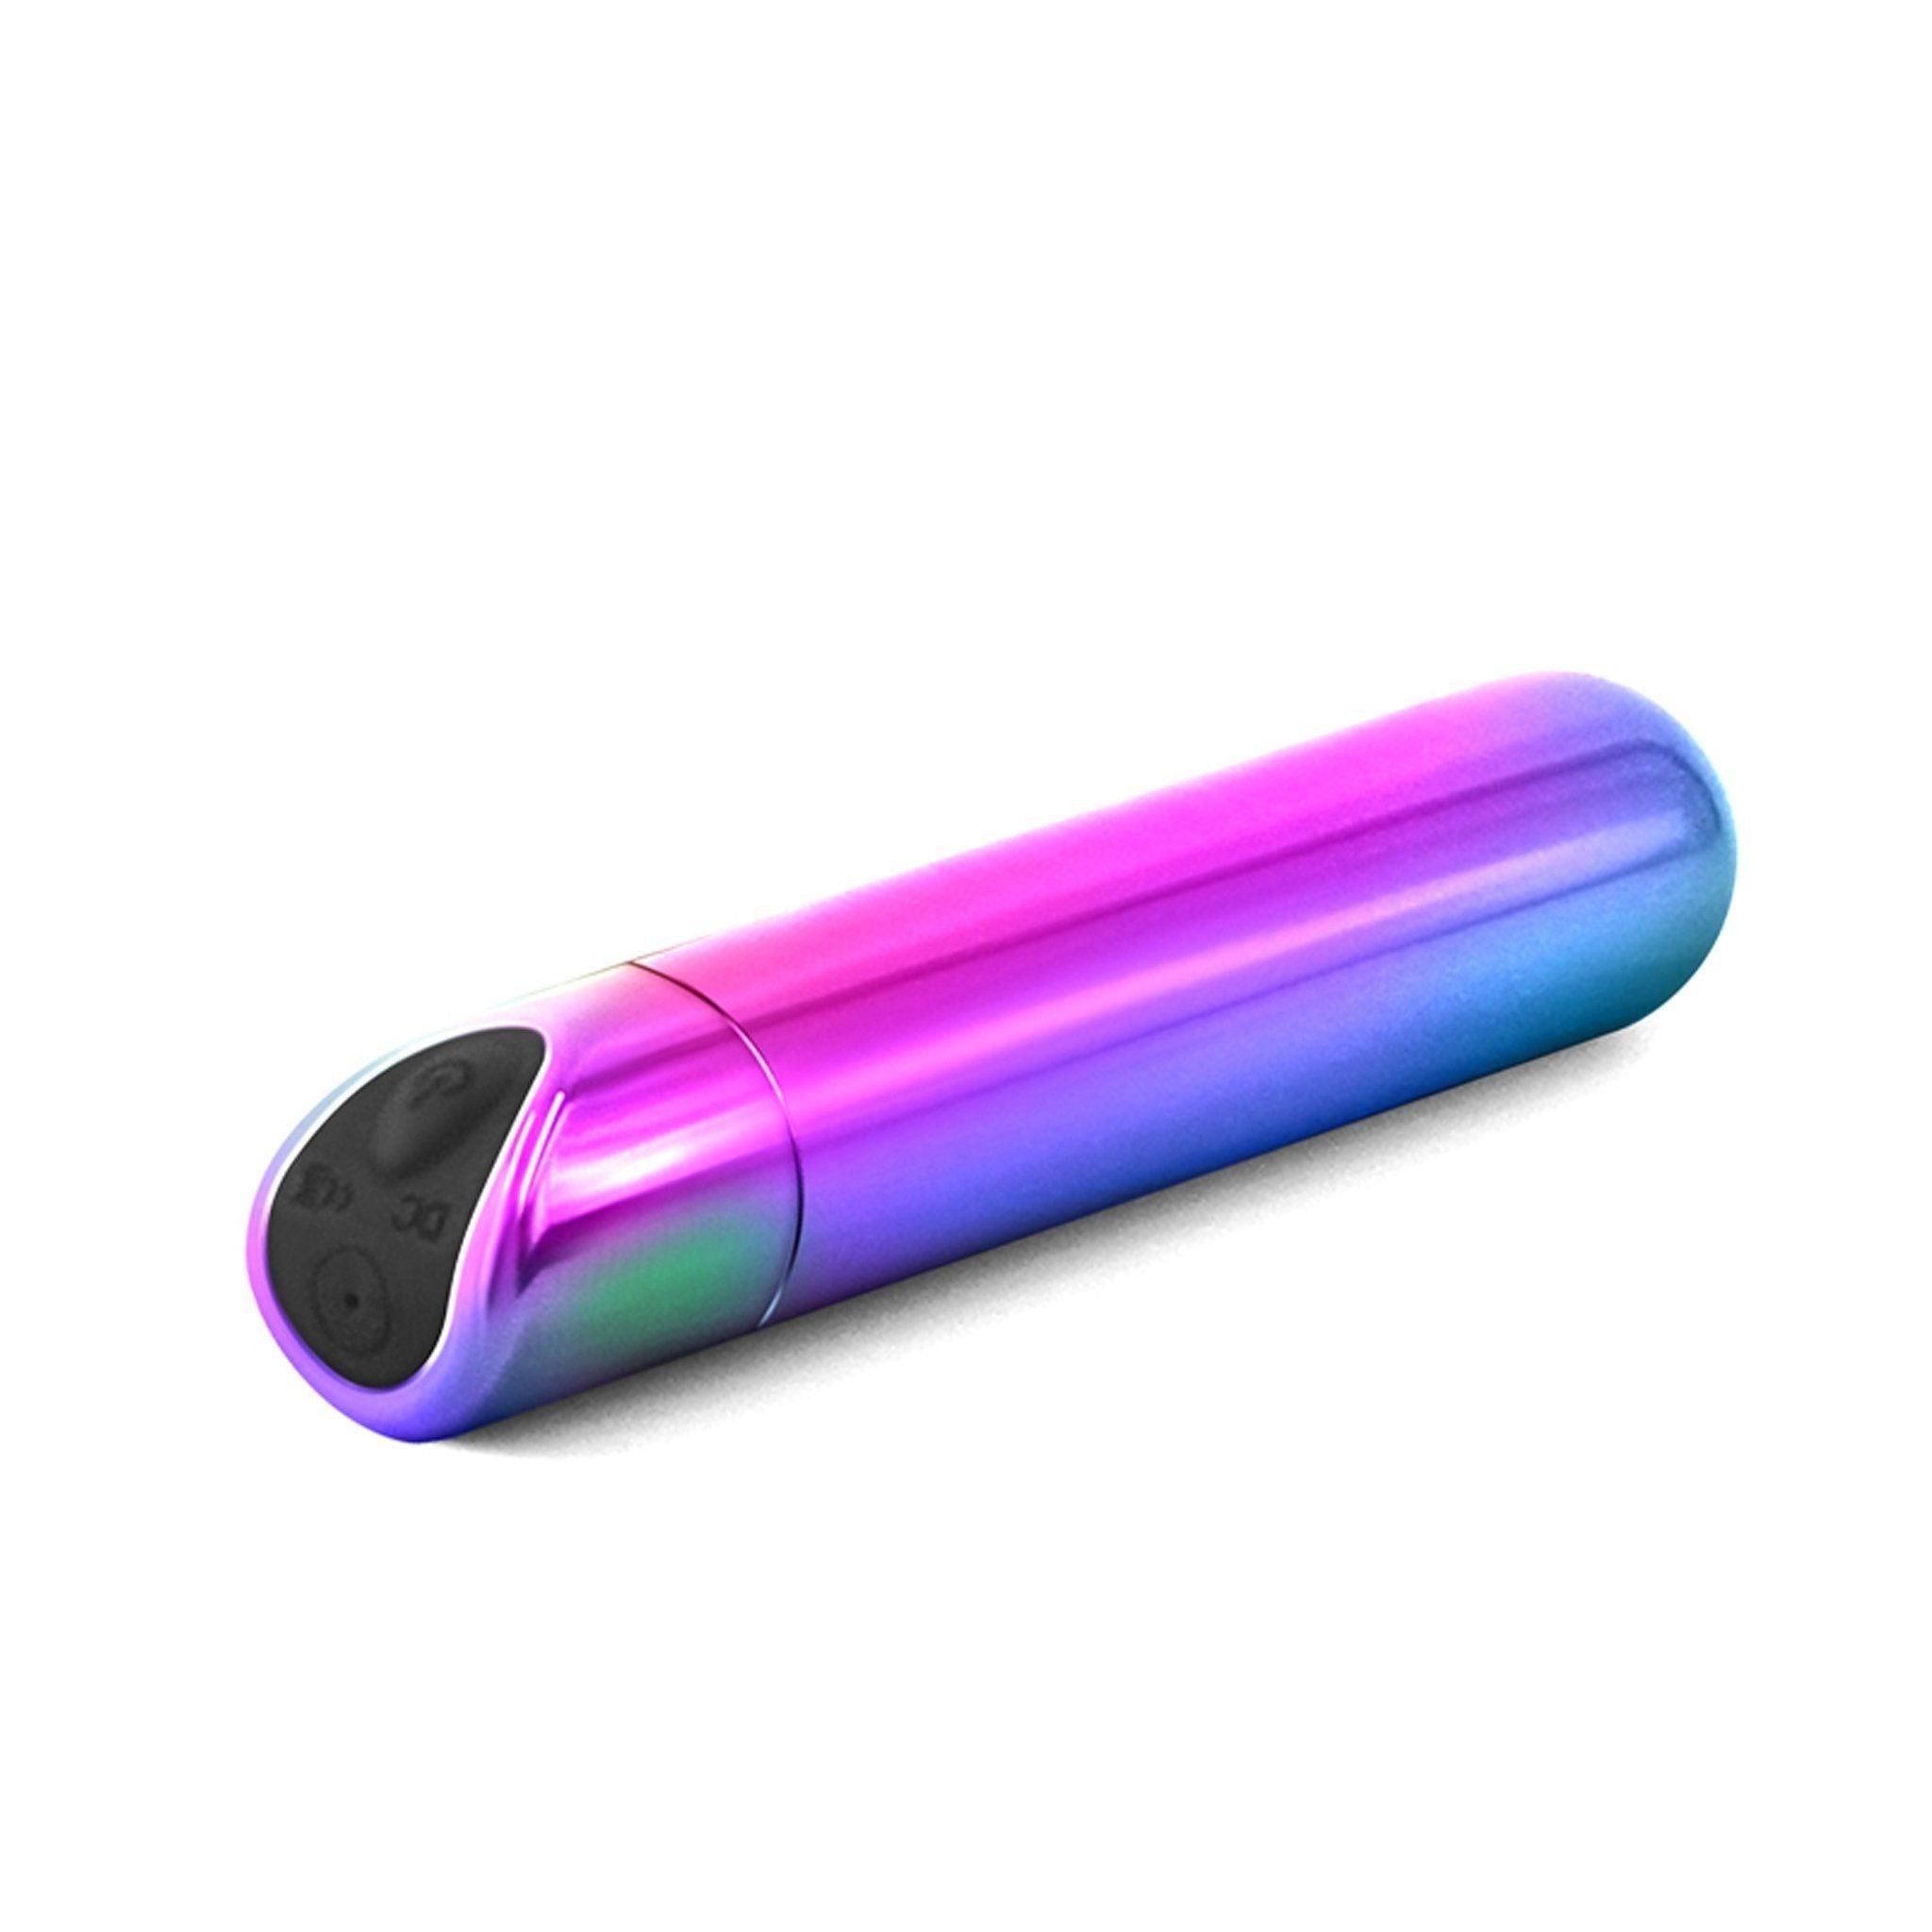 Lush Nightshade Petite Rechargeable 10 Function Vibrator - CheapLubes.com